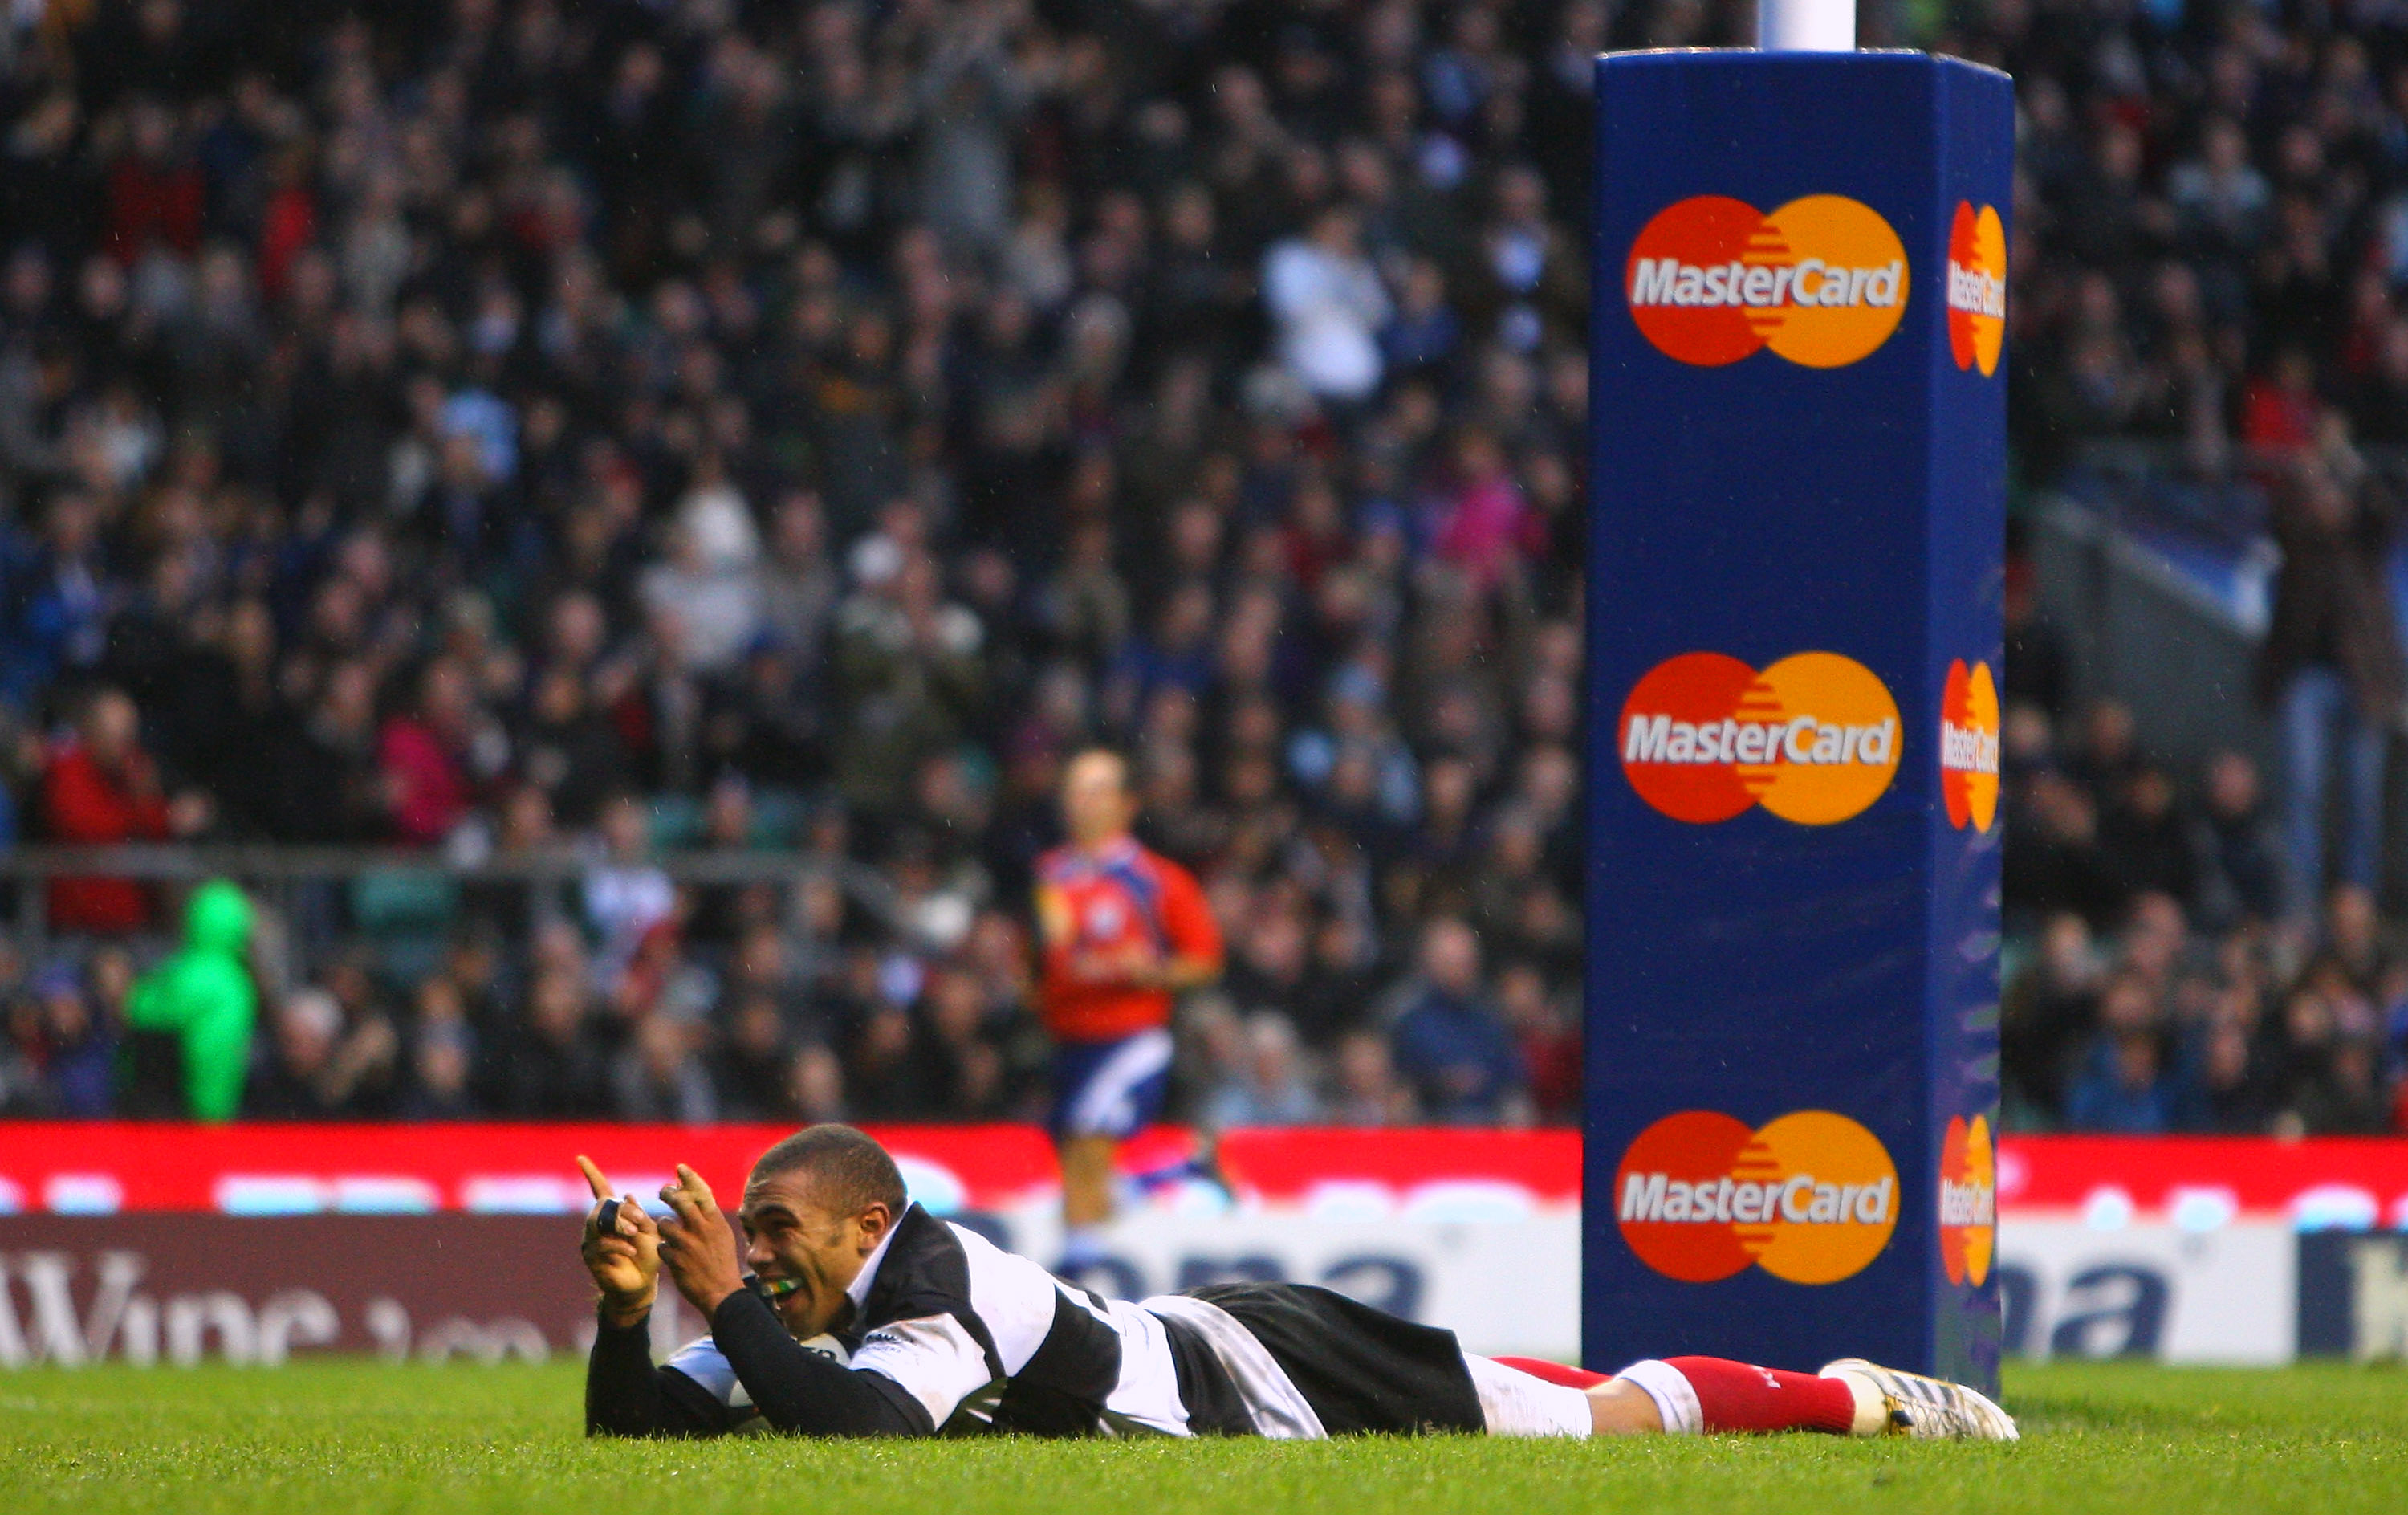 LONDON, ENGLAND - DECEMBER 05: Bryan Habana of the Barbarians celebrates his second try during the MasterCard trophy match between Barbarians and New Zealand at Twickenham Stadium on December 5, 2009 in London, England. (Photo by Mark Thompson/Getty Images)